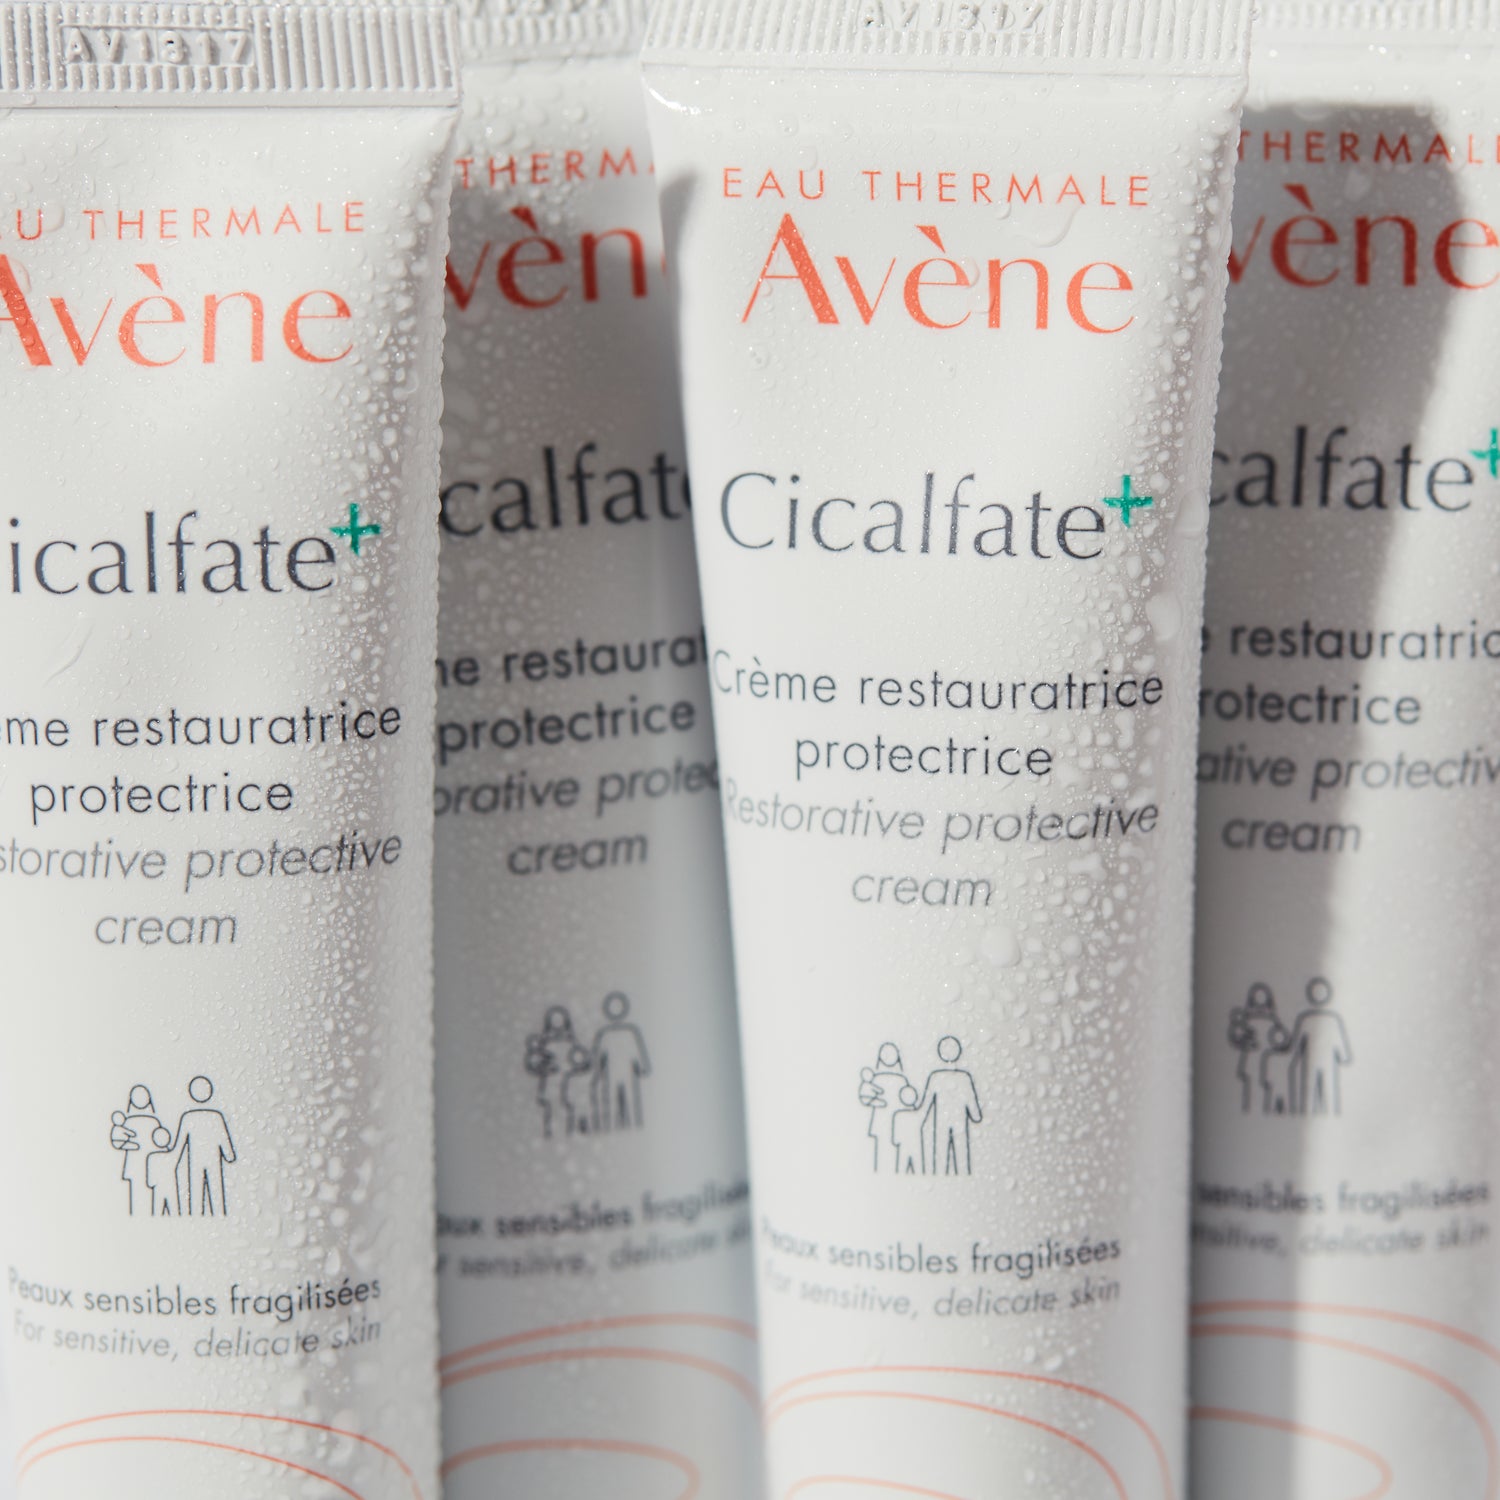 Cicalfate+ Restorative Protective Cream – The Things We Do Beauty